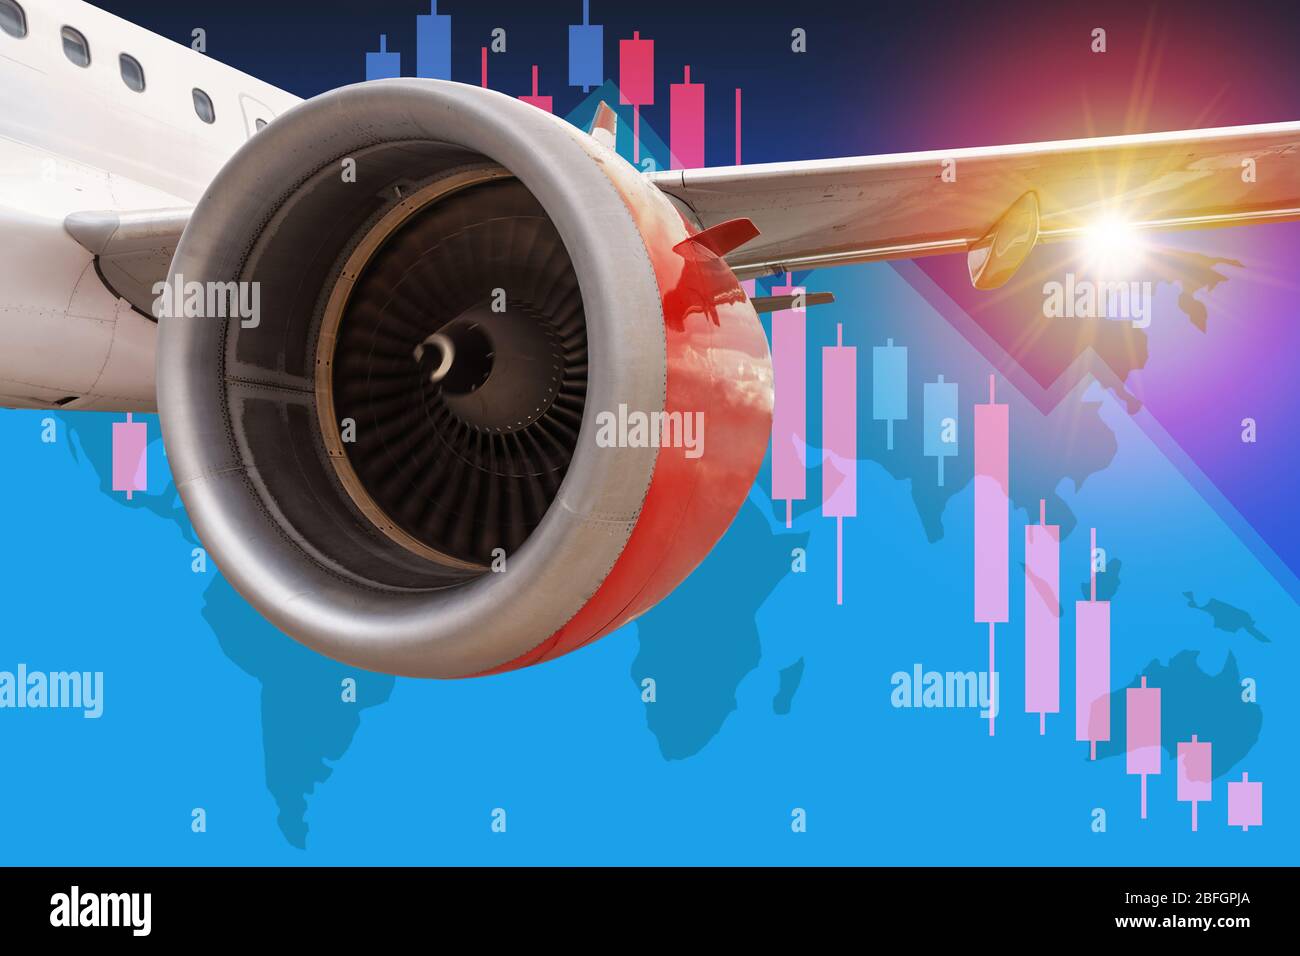 Concept of aviation and travel industry business in crisis with commercial airline in flight and tourism industry over declining stock chart and world Stock Photo